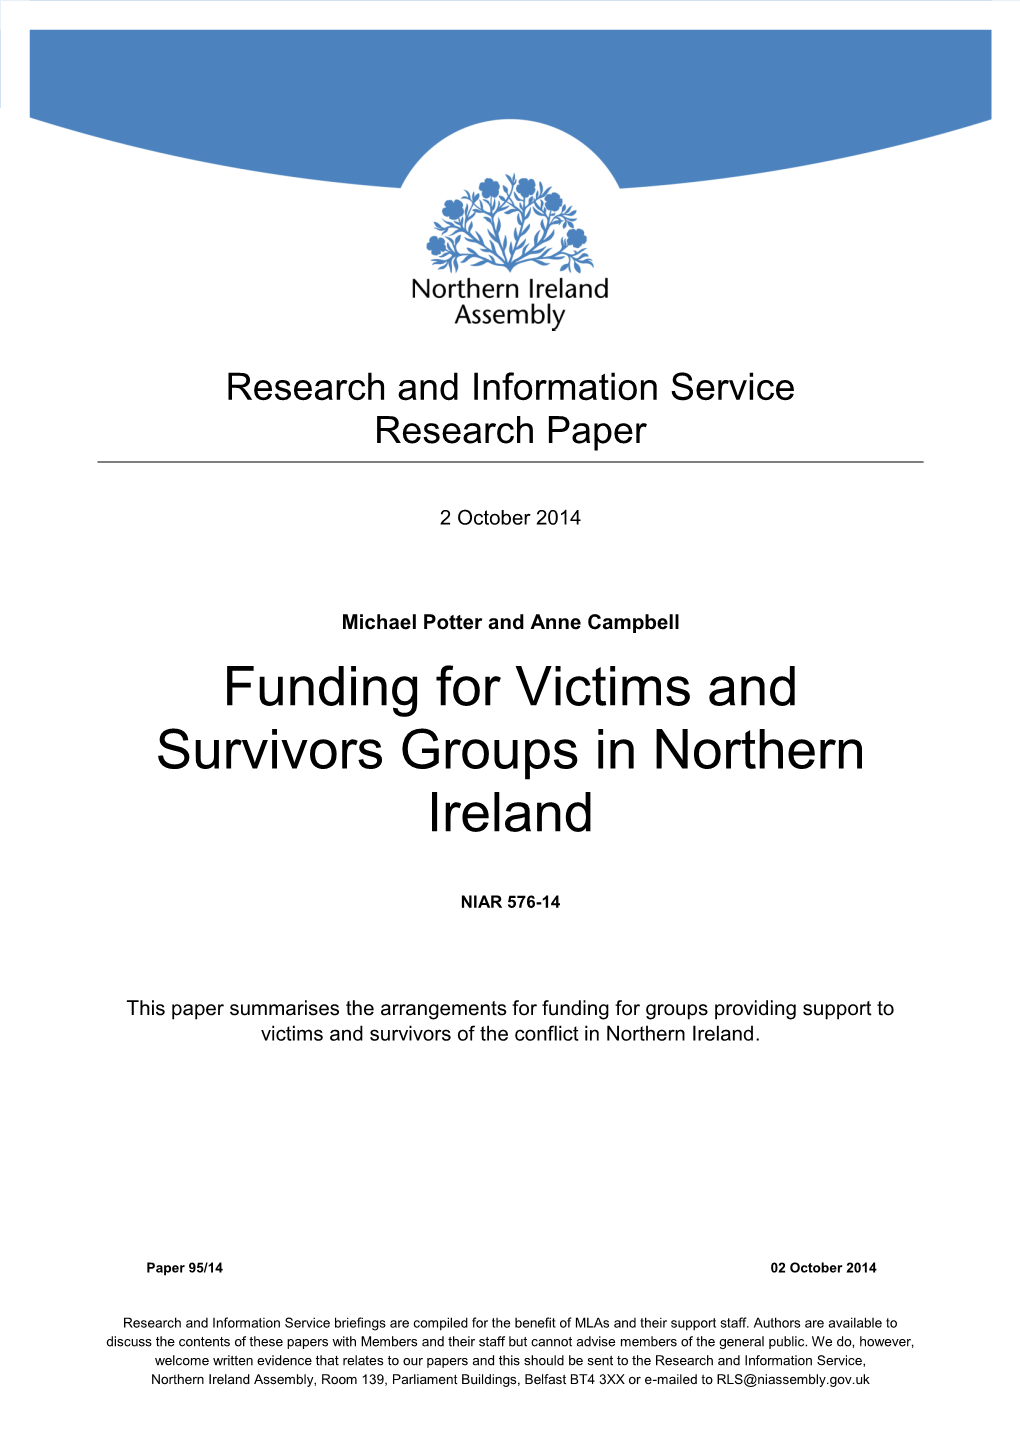 Funding for Victims and Survivors Groups in Northern Ireland